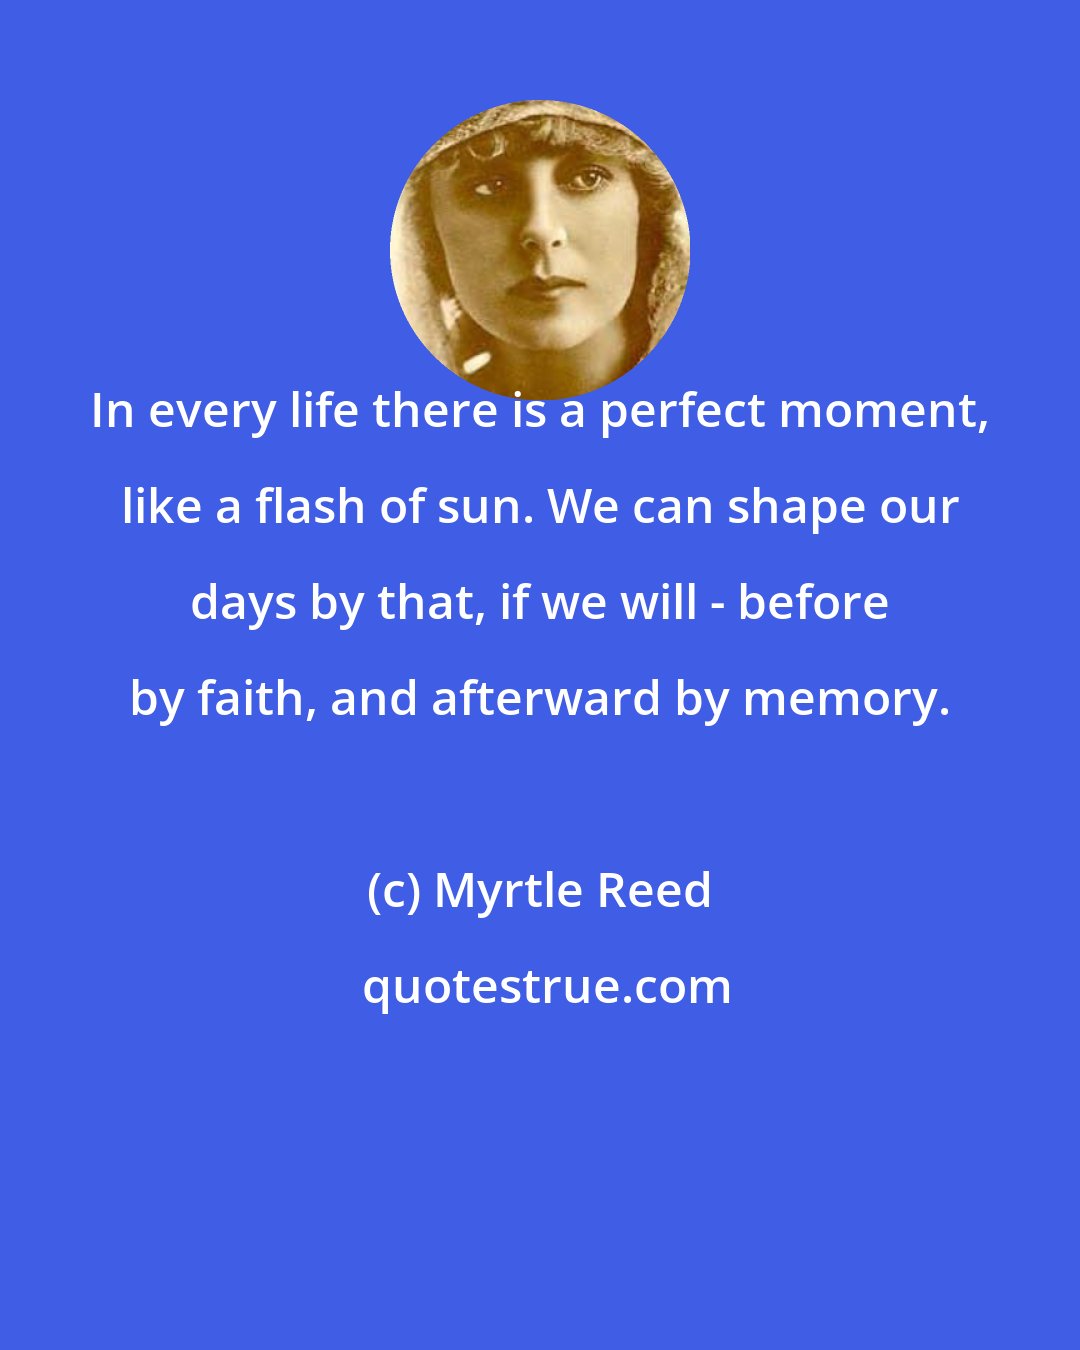 Myrtle Reed: In every life there is a perfect moment, like a flash of sun. We can shape our days by that, if we will - before by faith, and afterward by memory.